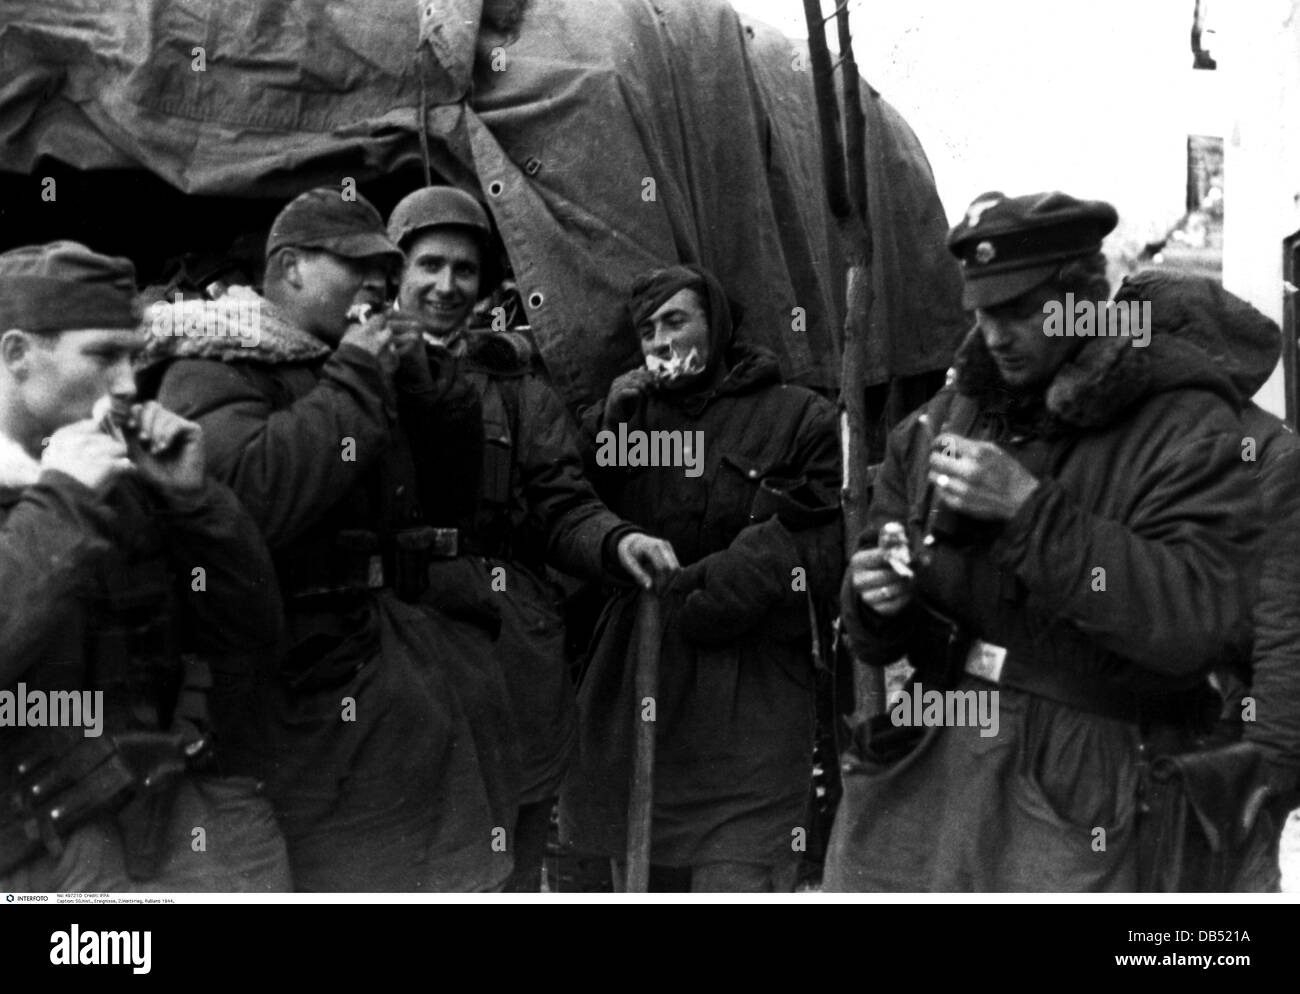 events, Second World War / WWII, Russia 1944 / 1945, soldiers of the Waffen-SS having a lunch break, Britskoye, Ukraine, 15.1.1944, Eastern Front, USSR, Waffen SS, eating, roast chicken, broiler, winter clothes, clothing, 20th century, historic, historical, Wehrmacht, Army Group South, uniform, uniforms, people, 1940s, Additional-Rights-Clearences-Not Available Stock Photo